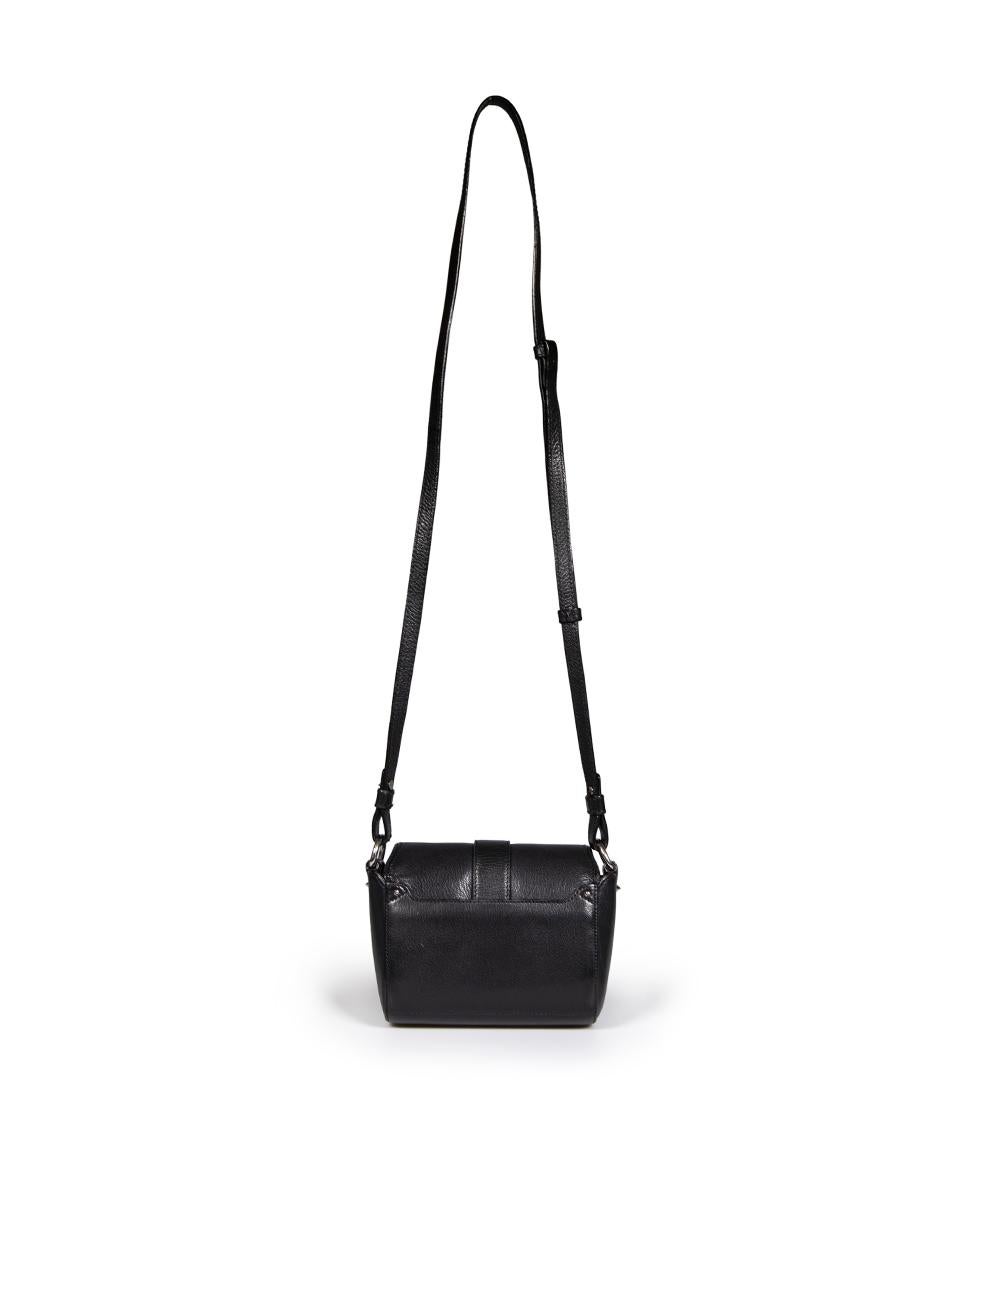 Givenchy Black Leather Obsedia Crossbody Bag In Good Condition For Sale In London, GB